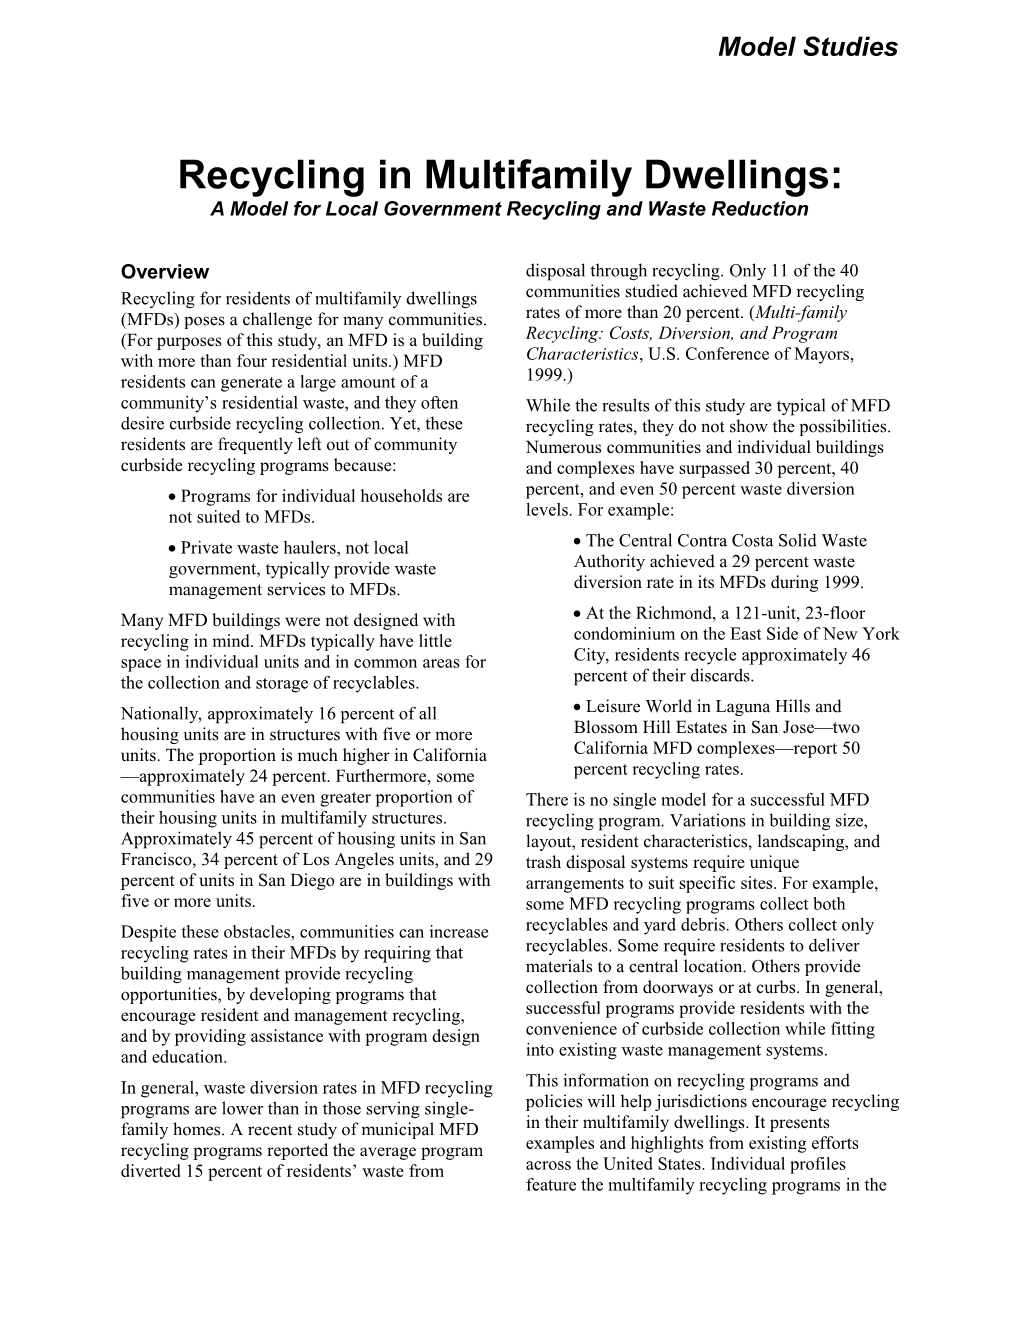 Recycling In Multifamily Dwellings: A Model For Local Government Recycling And Waste Reduction